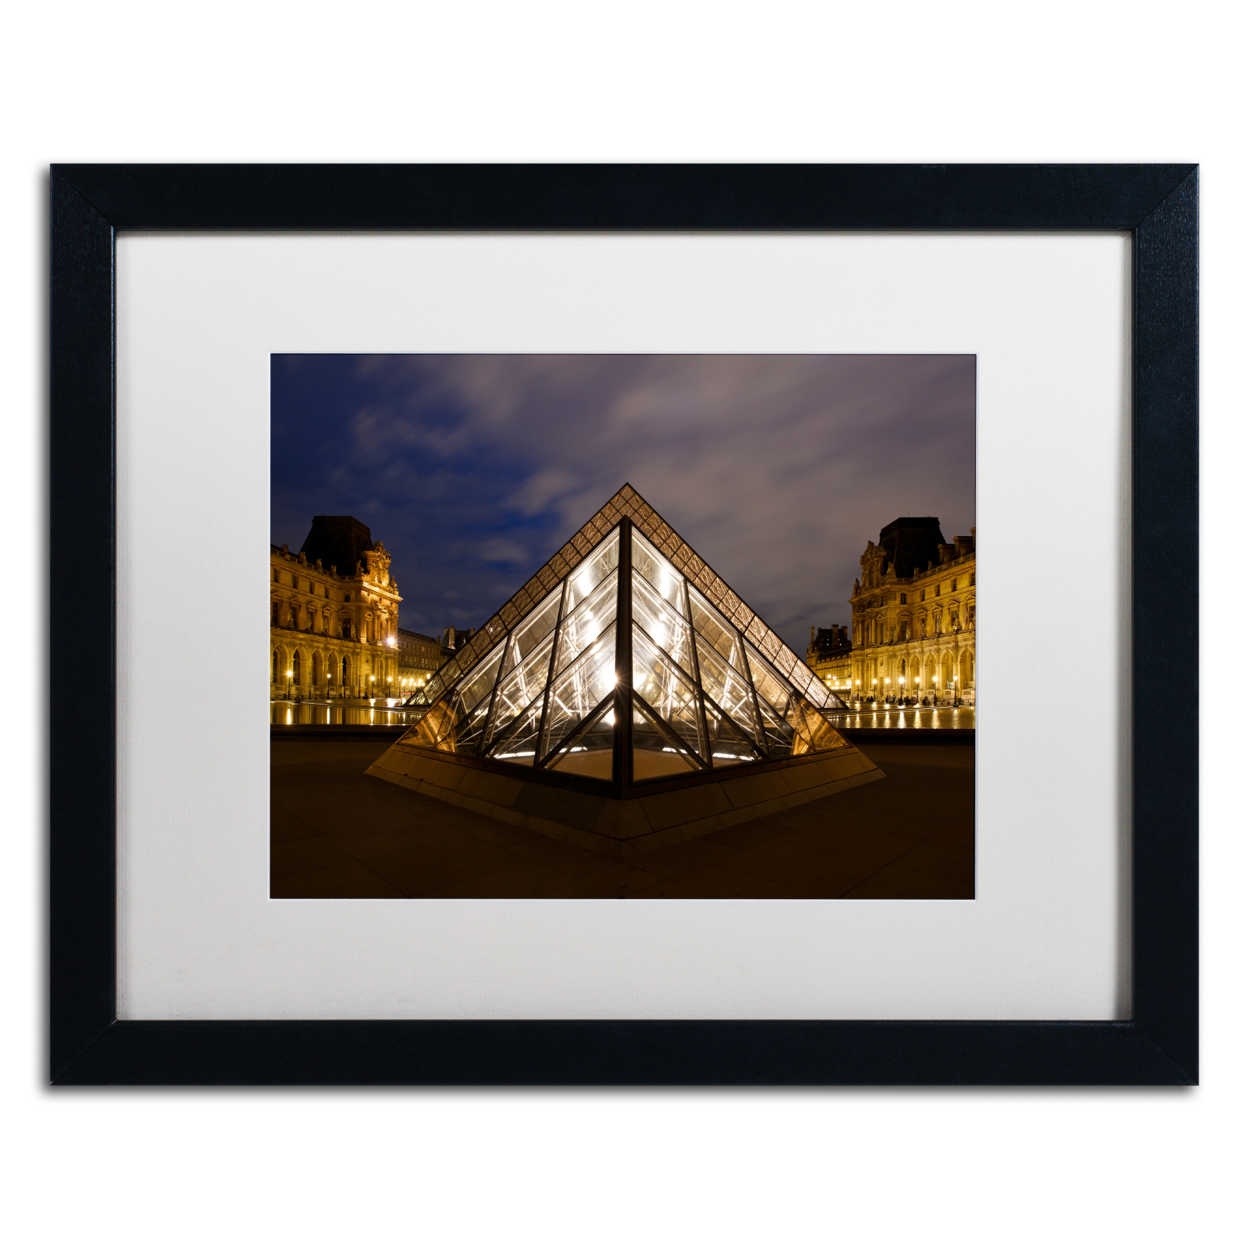 Michael Blanchette Photography 'Louvre Pyramid' Black Wooden Framed Art 18 X 22 Inches